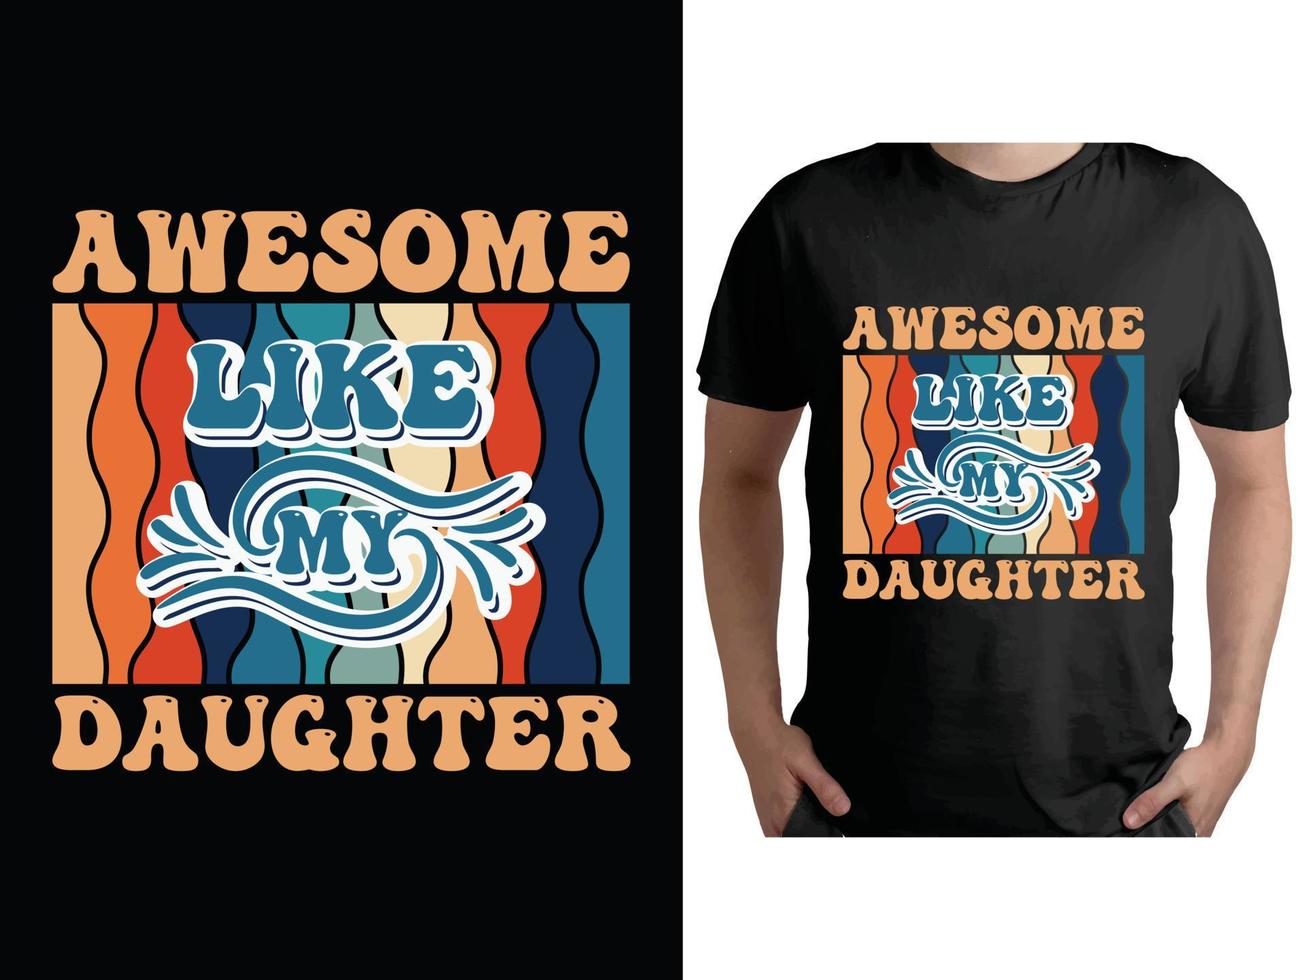 Awesome like my daughter, Father's day T-shirt design, Dad t shirt design, Typography T-shirt design vector